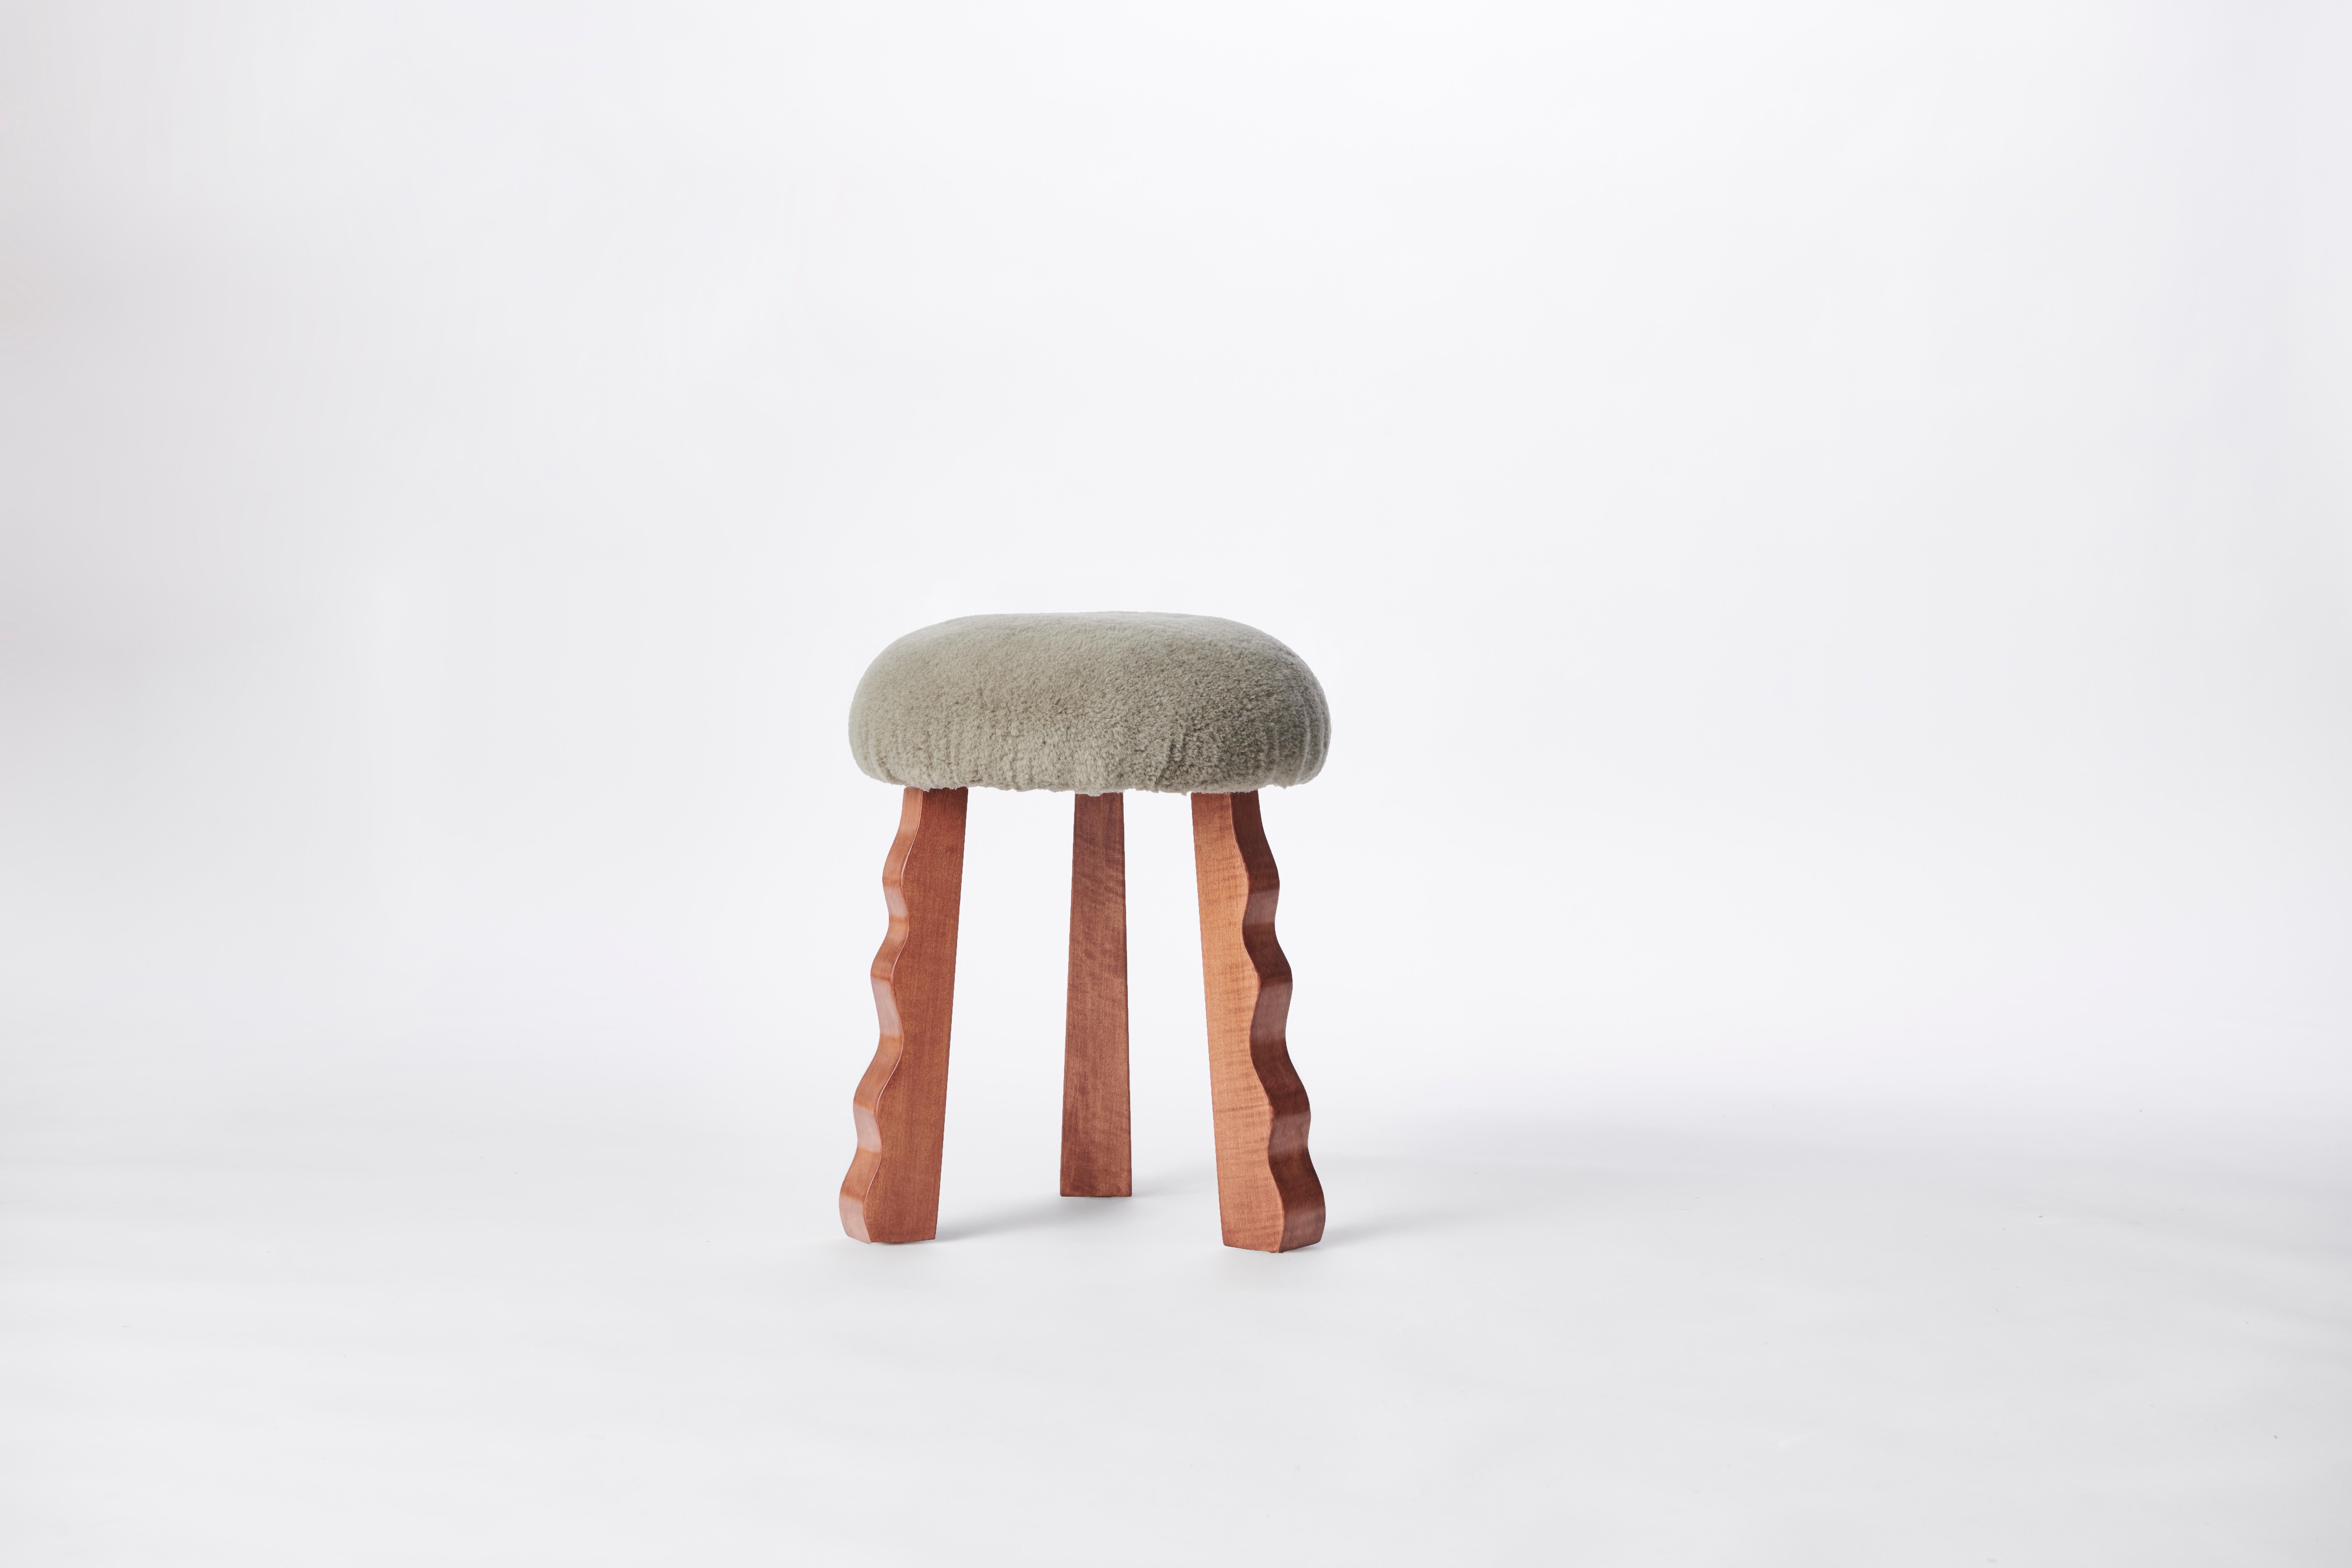 Made to order gray shearling and red oak stool designed by Christian Siriano.

Fabric: shearling (available in custom fabric)
Base: Red Oak (available in custom finish)

Dimensions: 
Top Diameter: 15”
Base Diameter: 16”
Overall Height: 18.5”
 